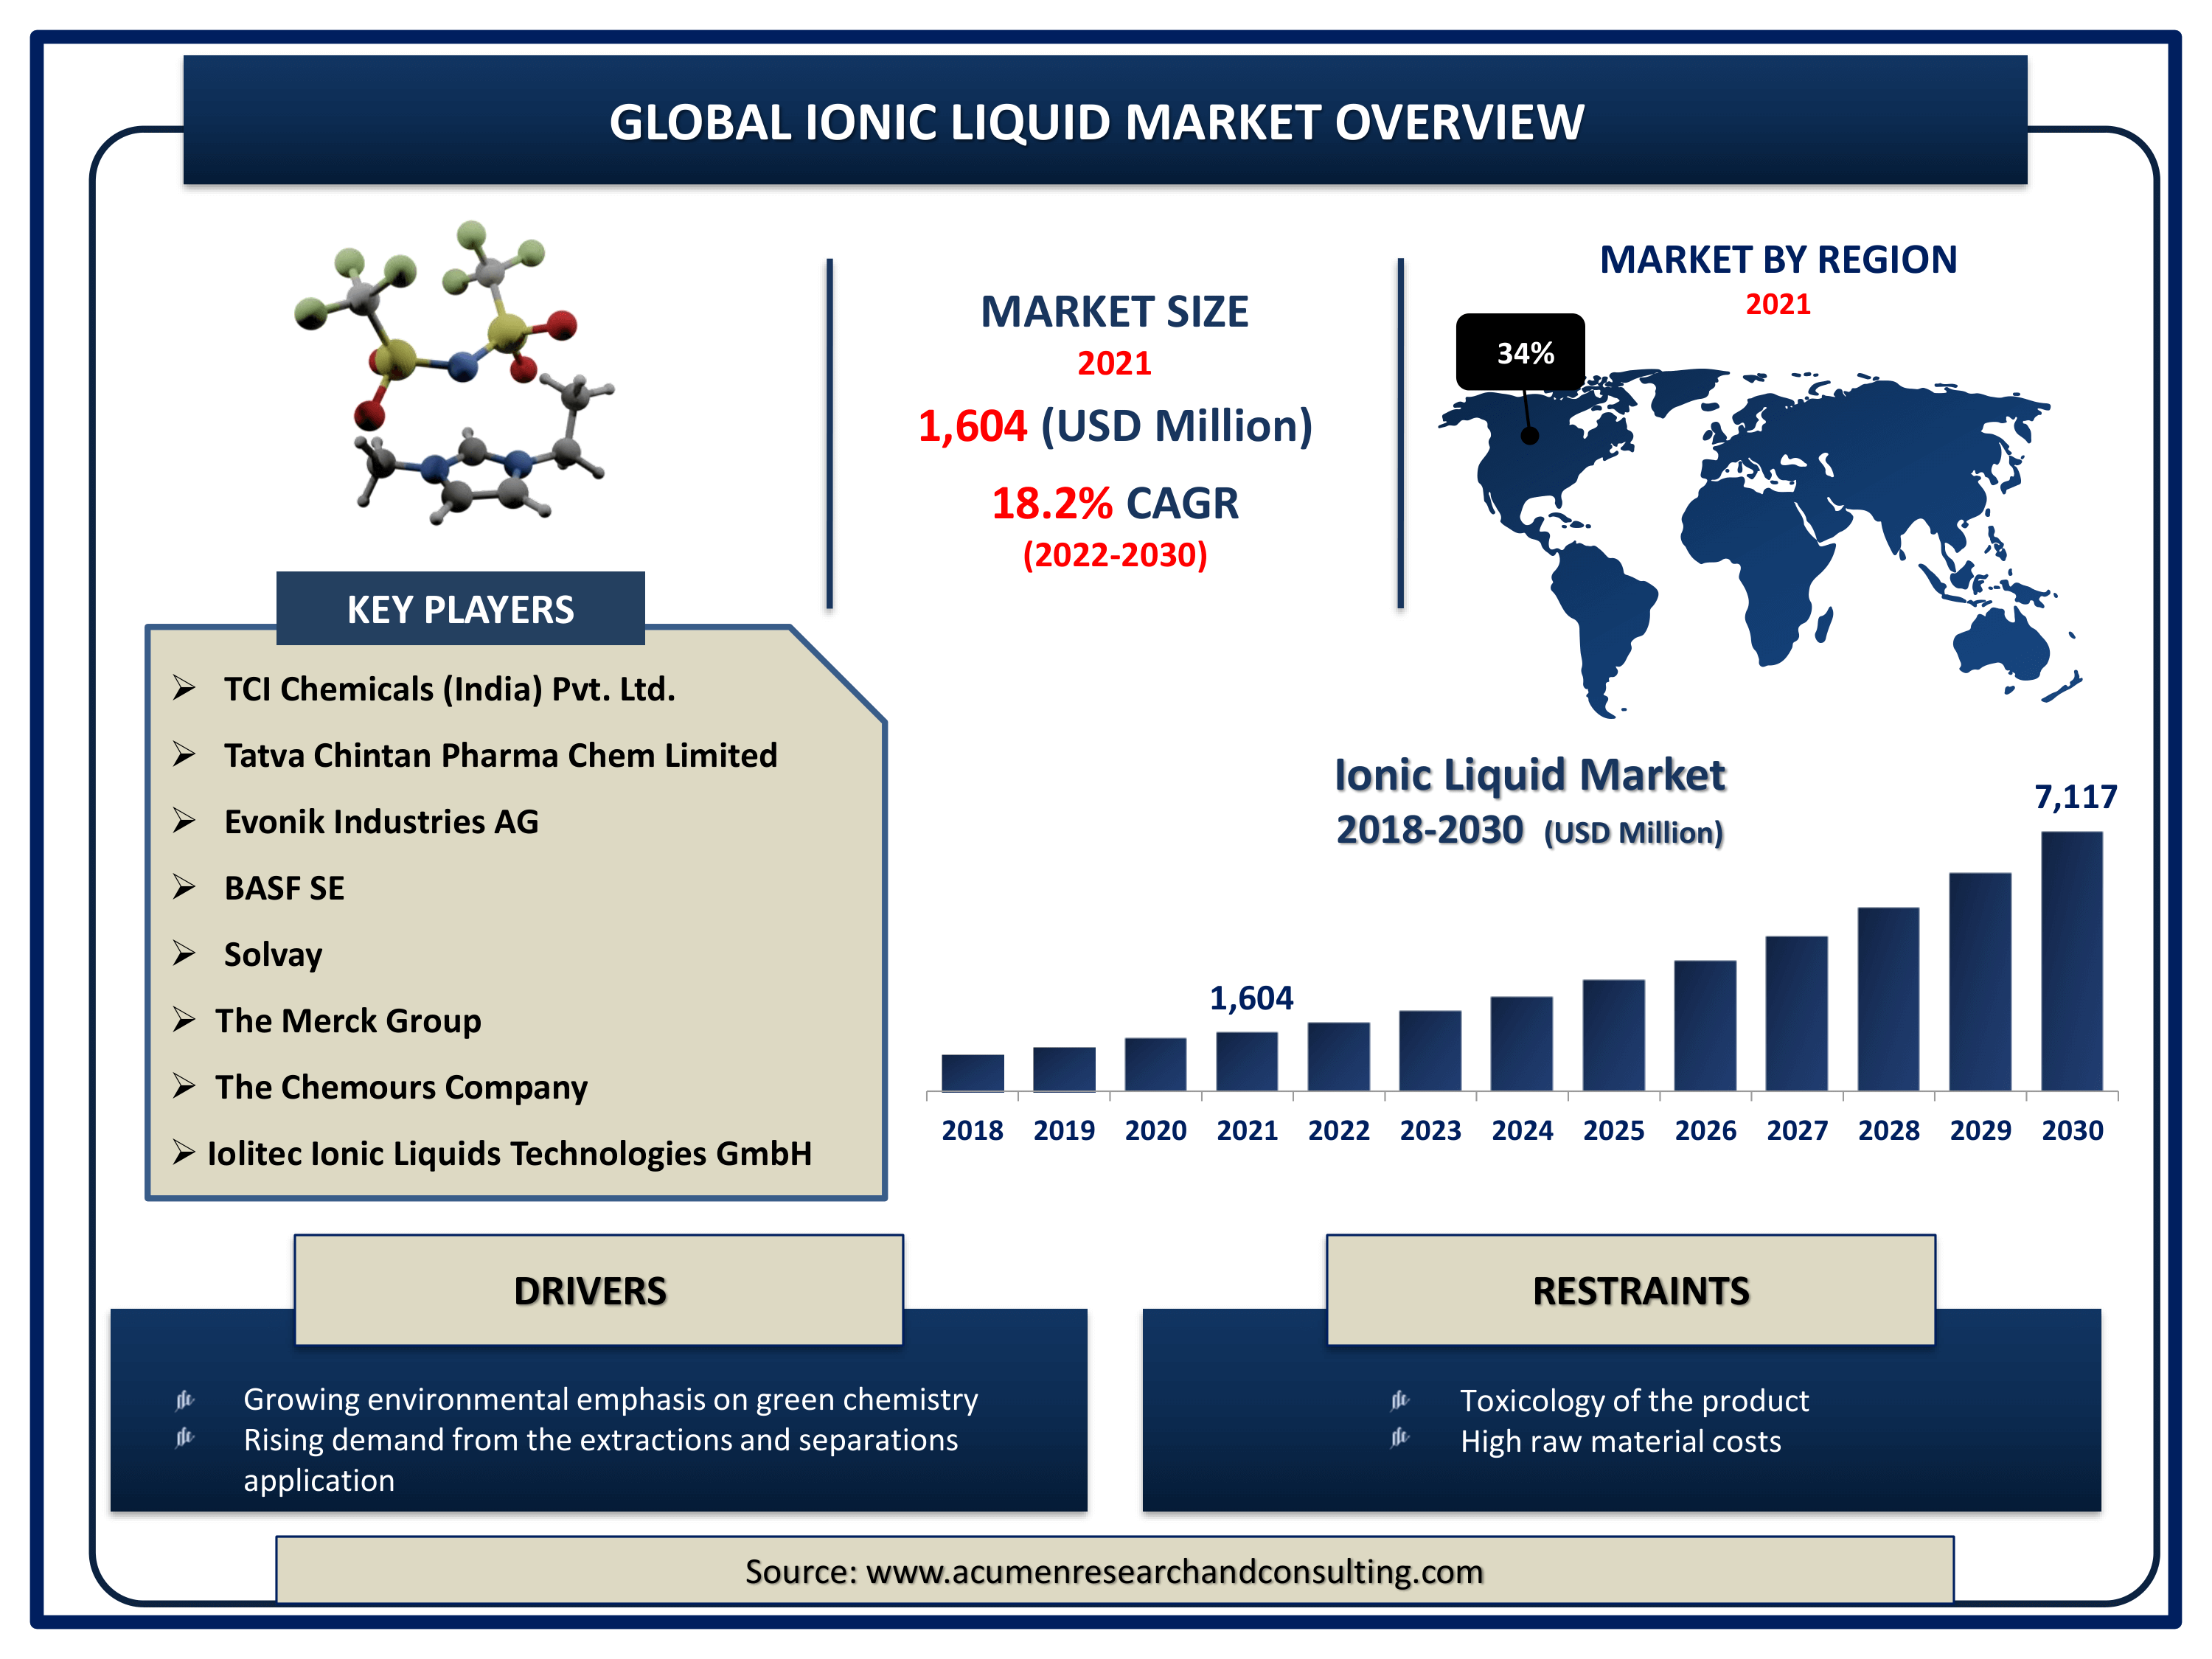 Global ionic liquid market revenue is estimated to expand by USD 7,117 million by 2030, with an 18.2% CAGR from 2022 to 2030.